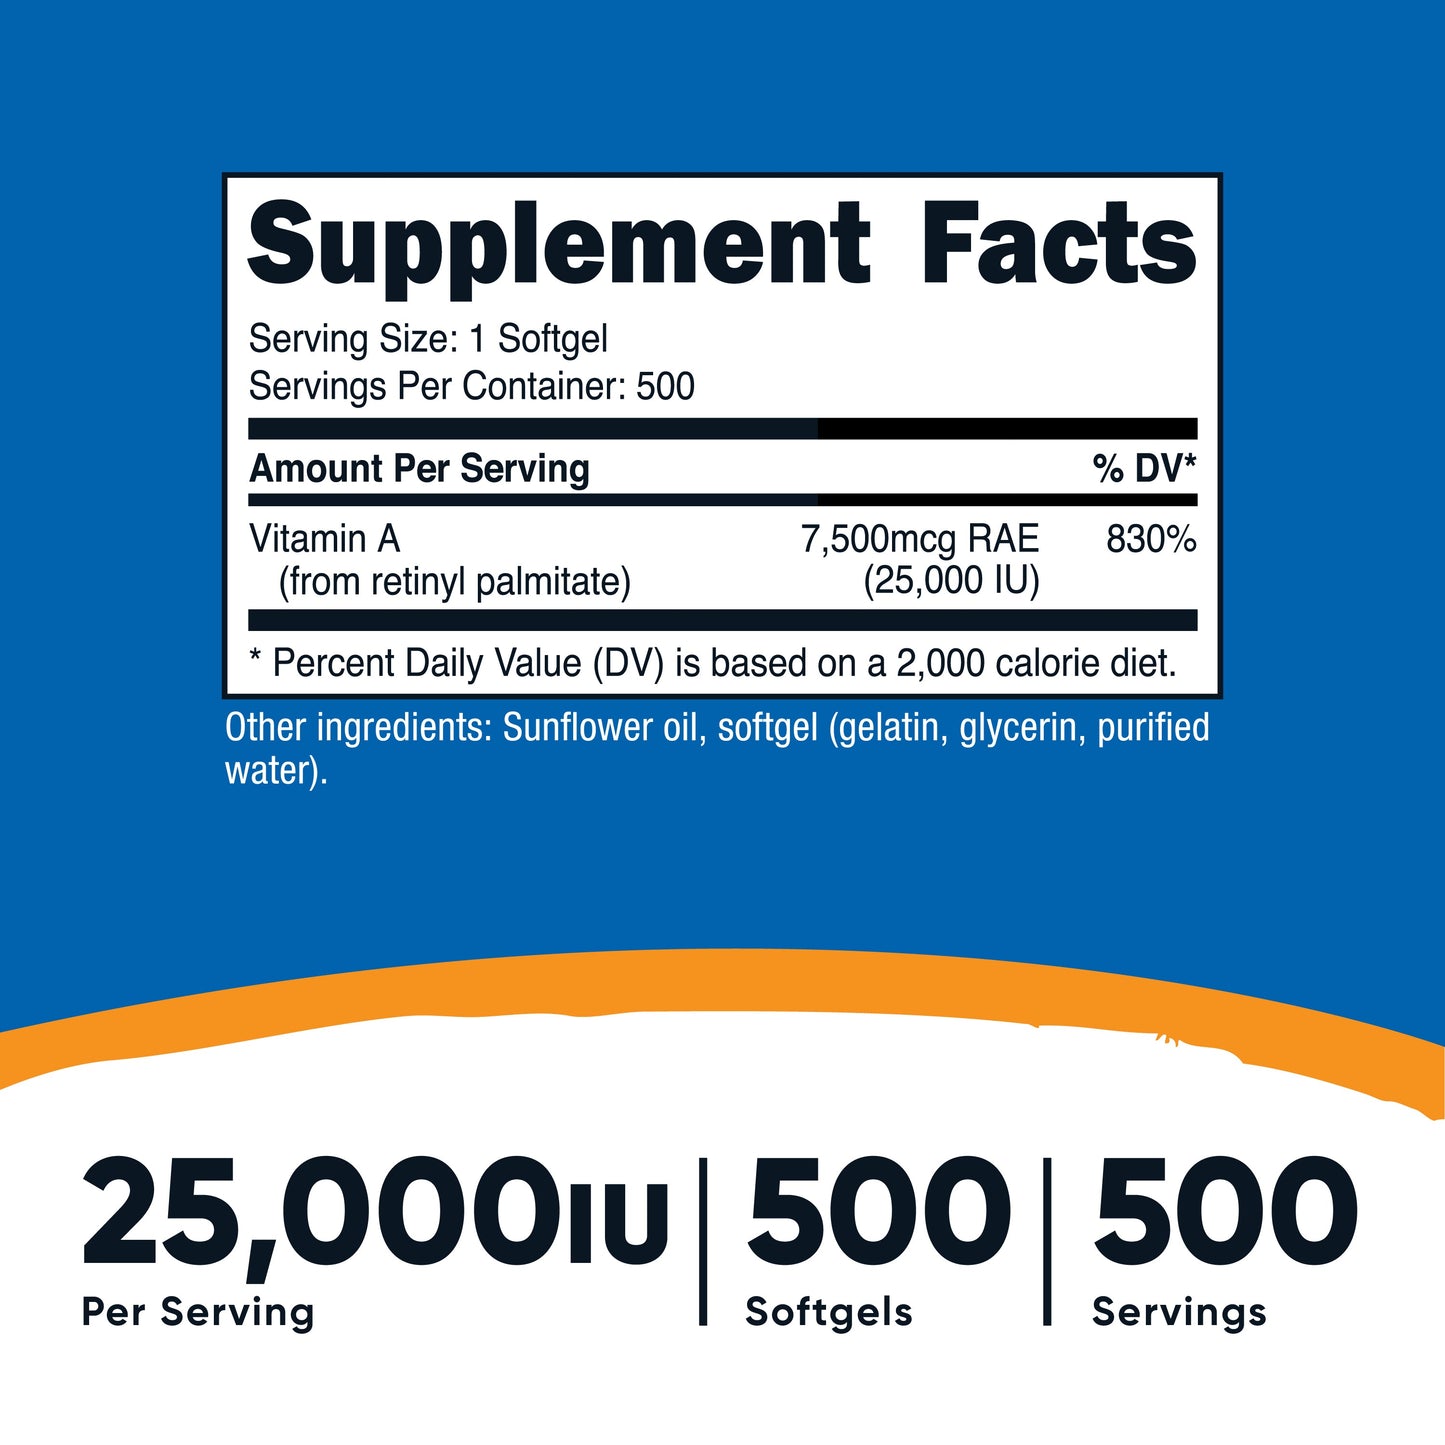 Nutricost Vitamin A Softgels